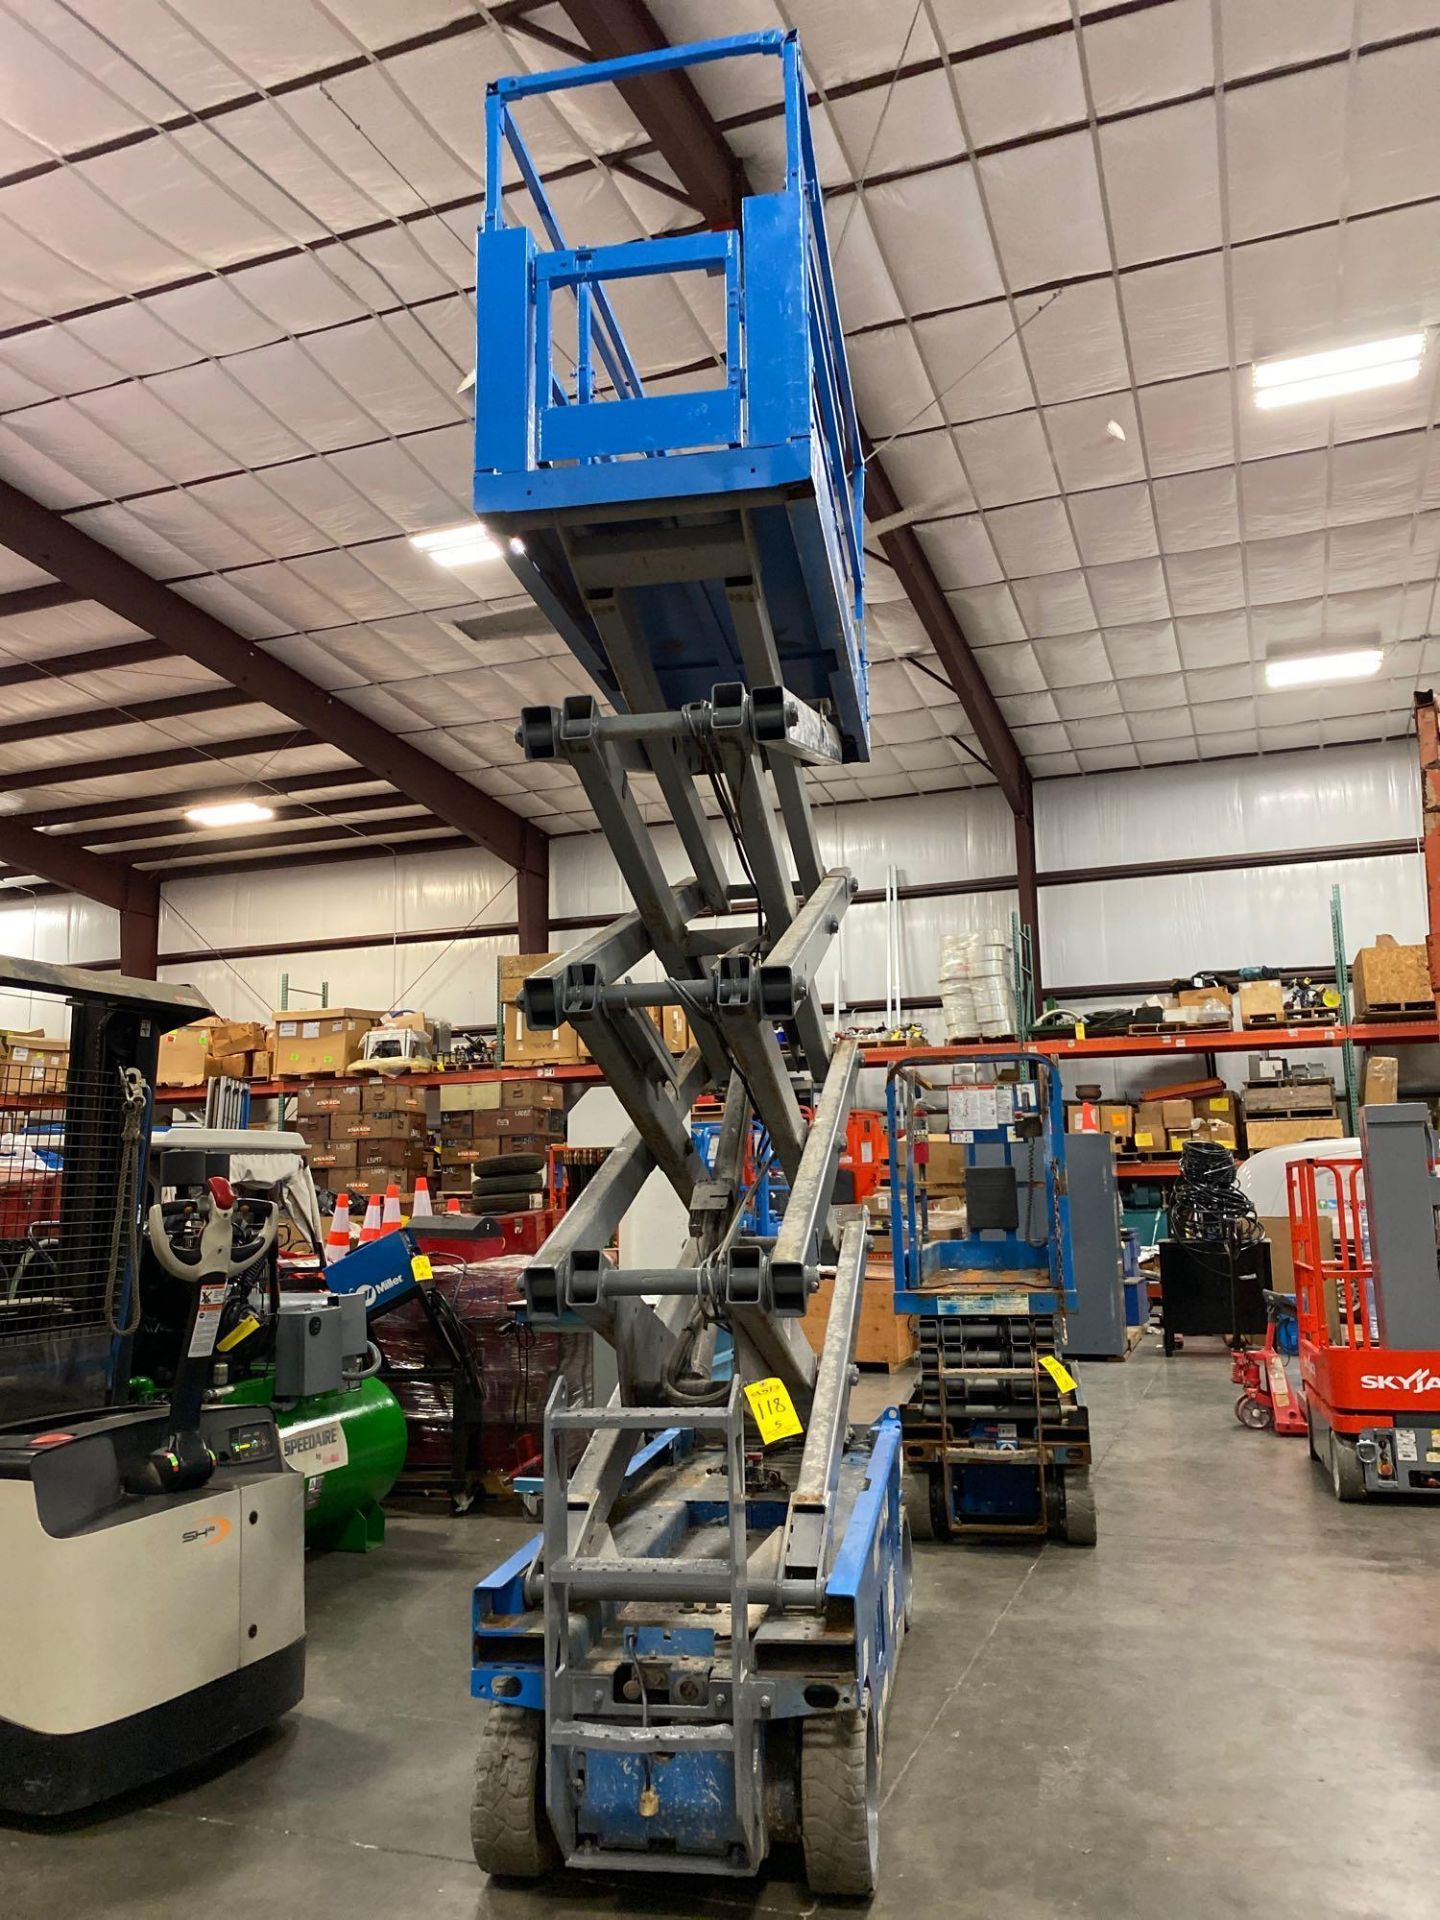 GENIE GS 2632 ELECTRIC SCISSOR LIFT, 26' PLATFORM HEIGHT, BUILT IN BATTERY CHARGER - Image 4 of 12